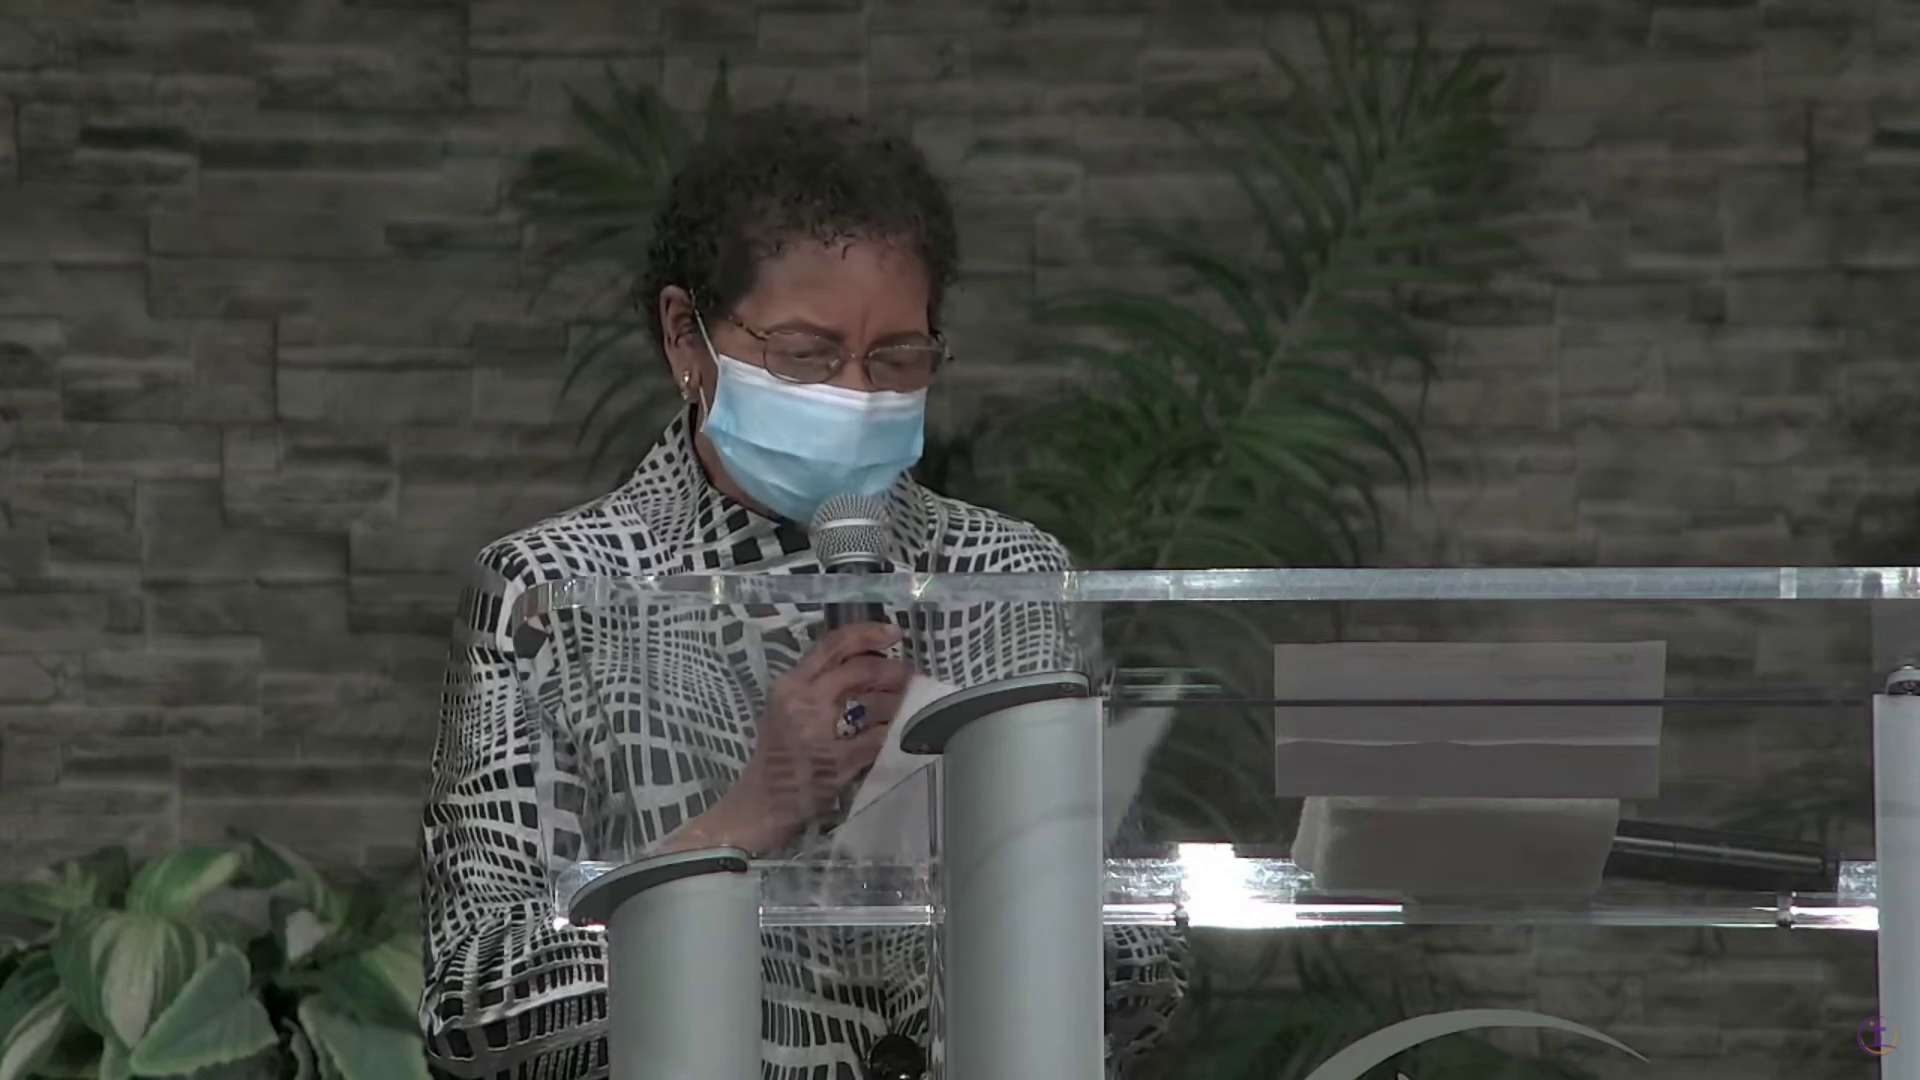 A woman wearing a blue medical mask speaks at a microphone at a church.